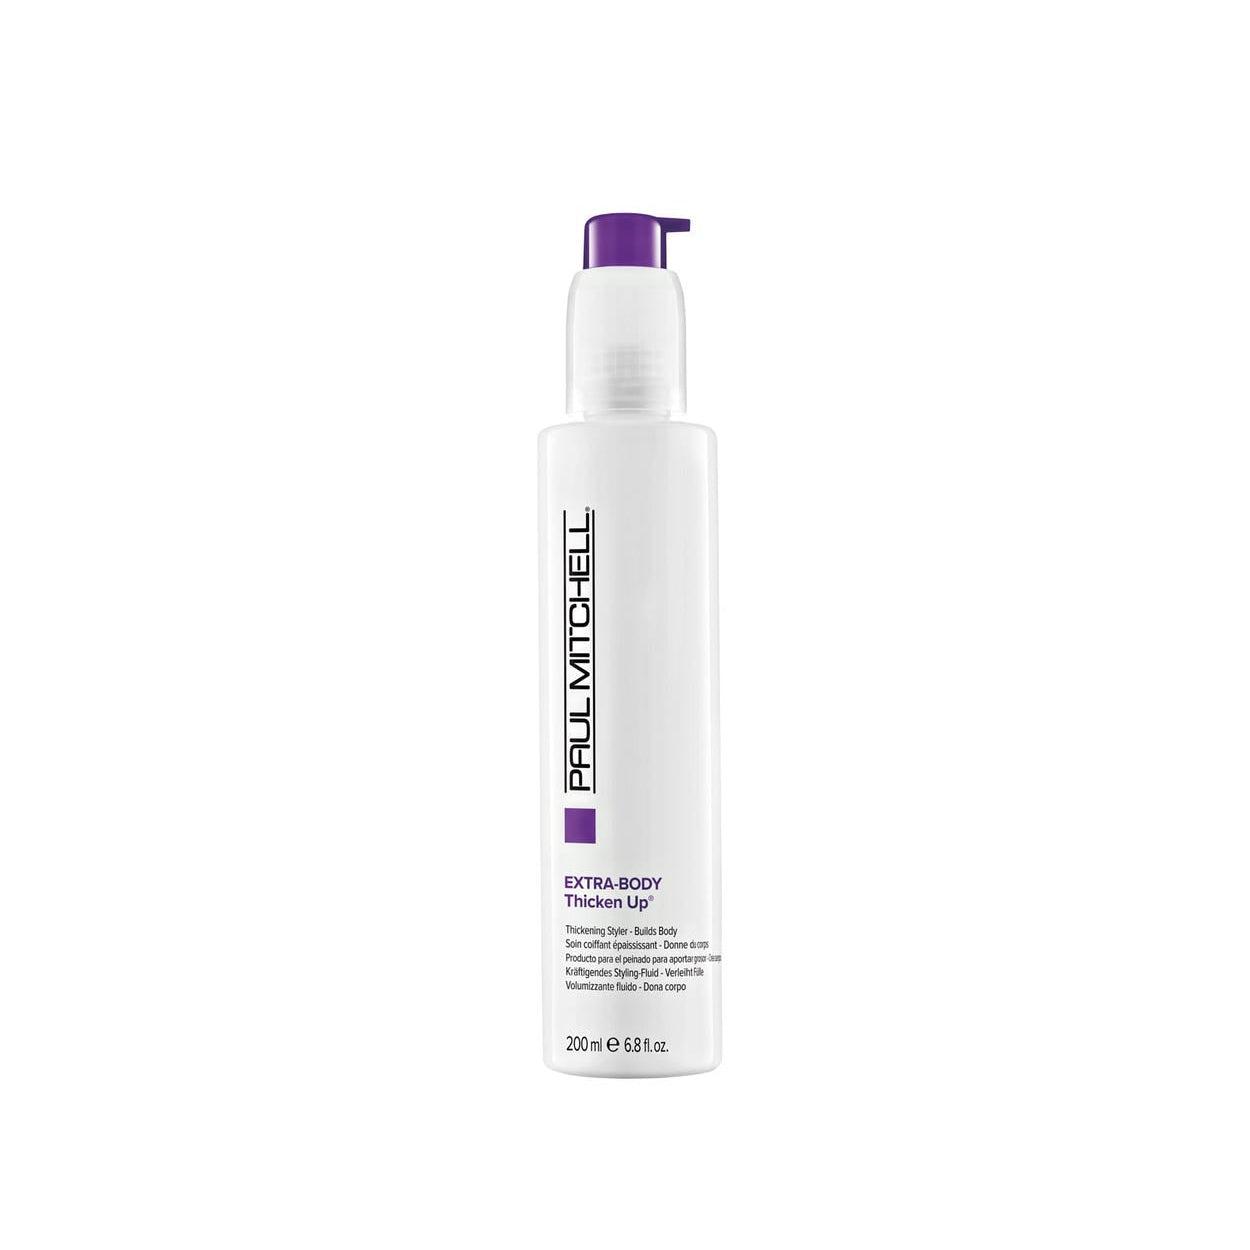 Paul Mitchell extra body thicken up styling liquid 200ml